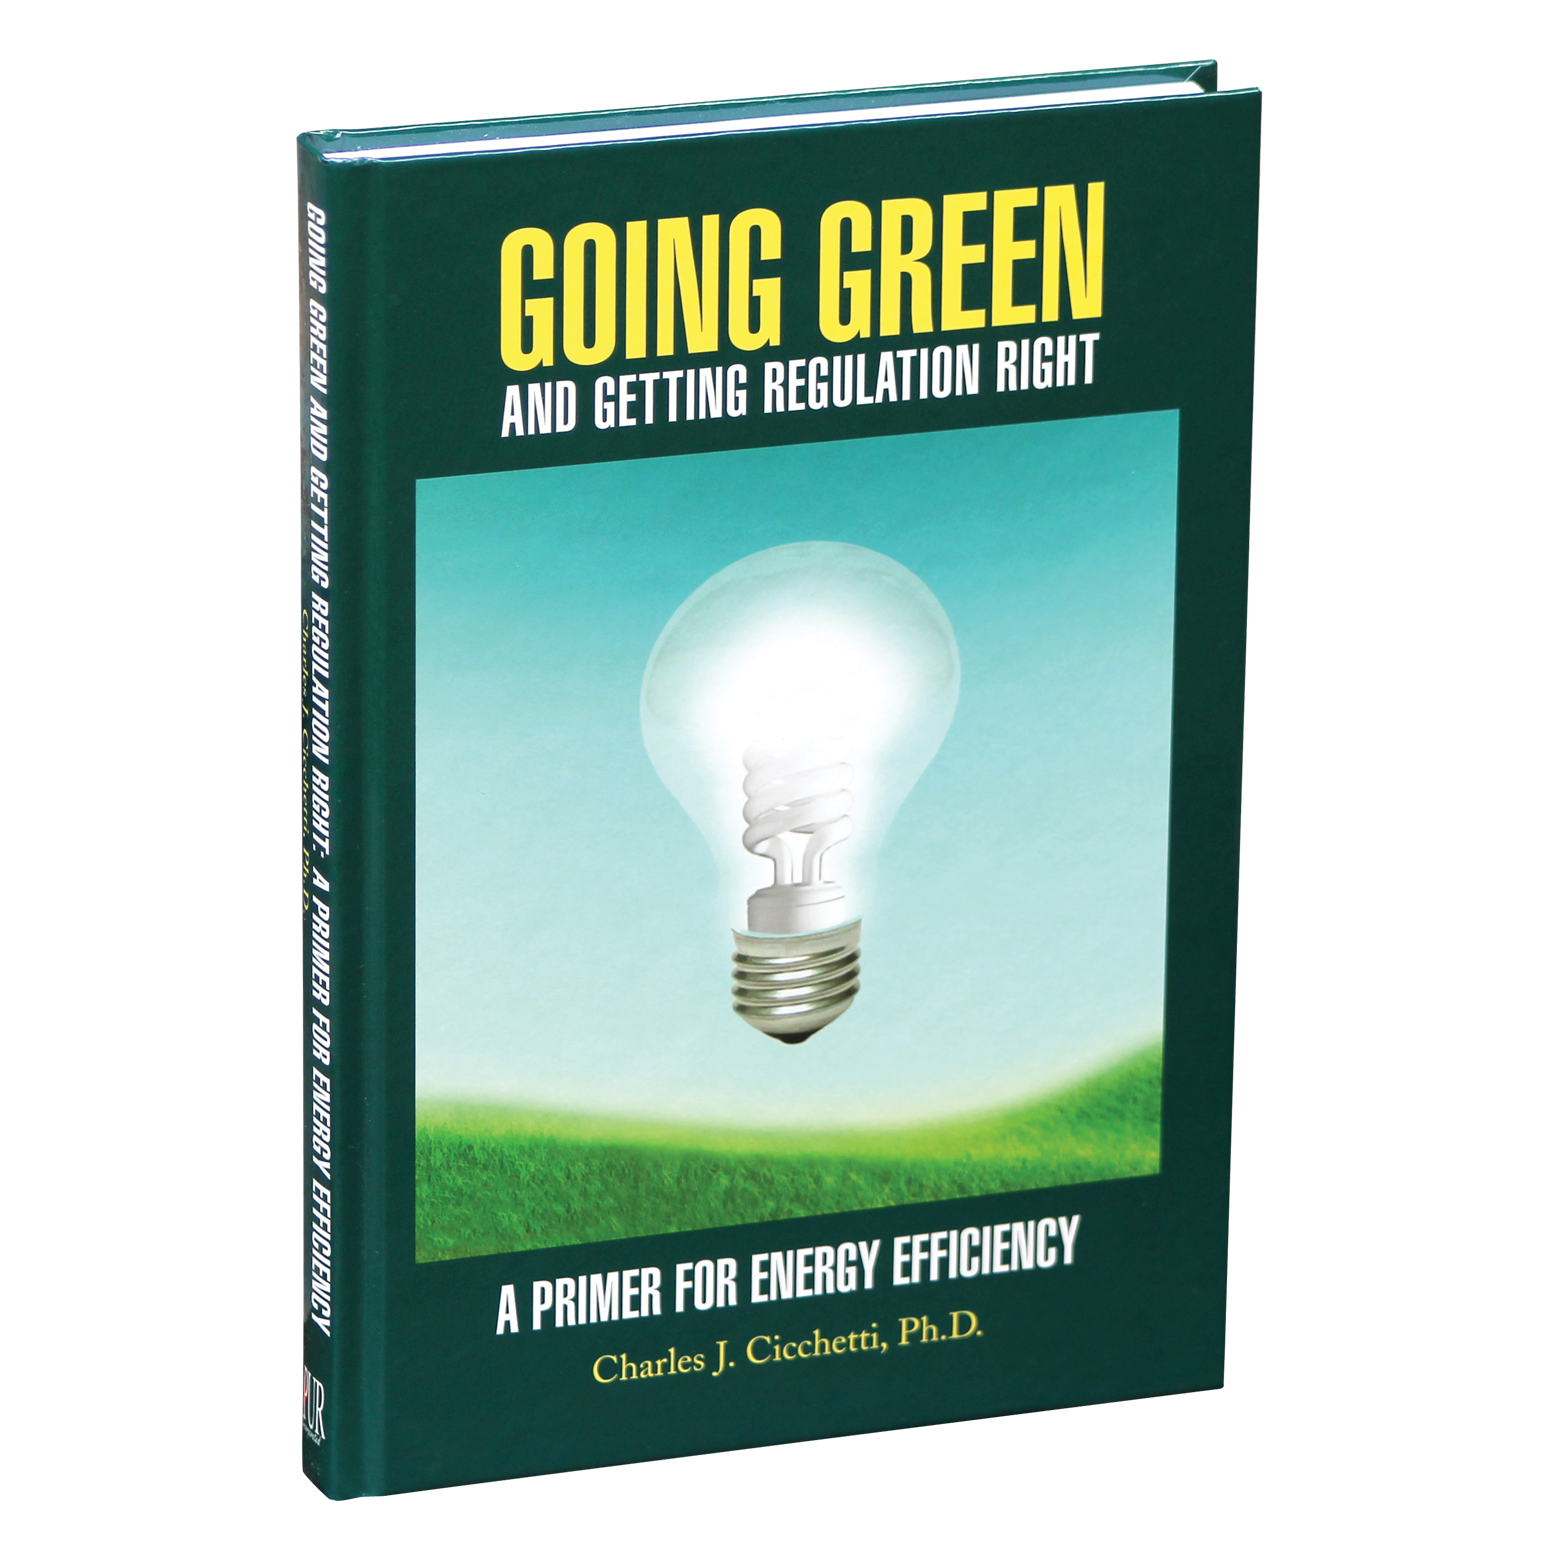 Going Green and Getting Regulation Right: A Primer on Energy Efficiency